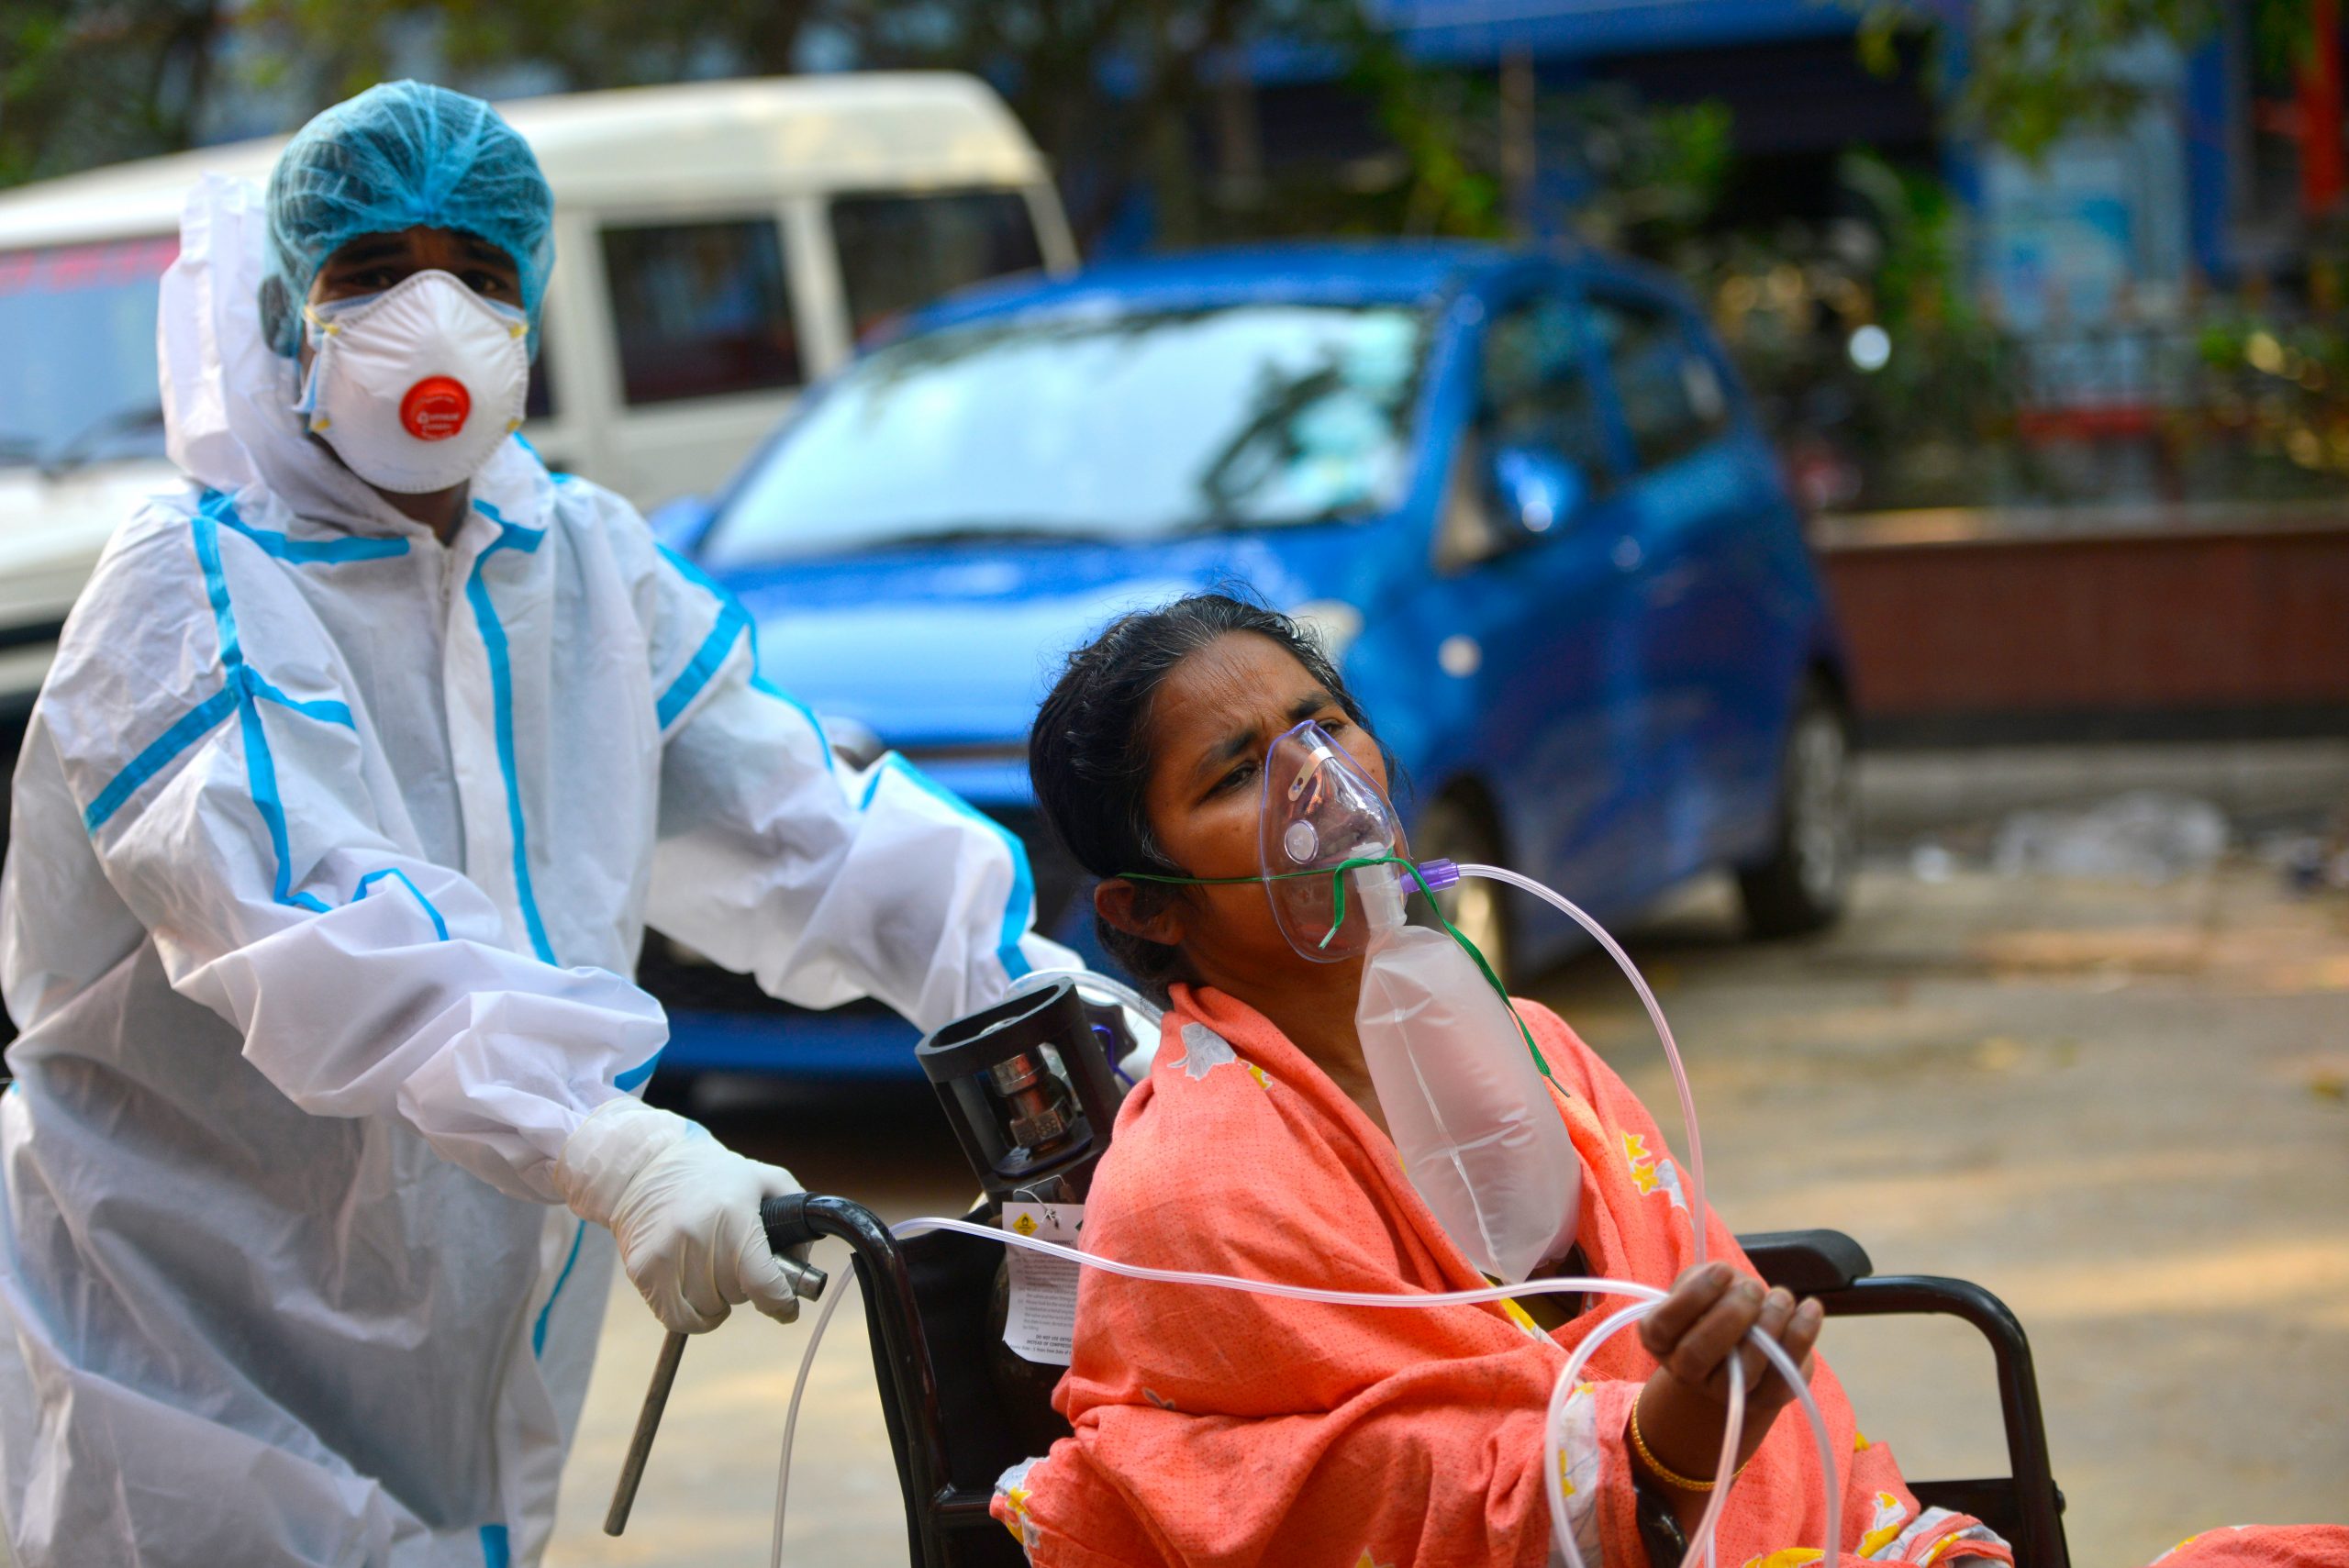 A Covid-19 patient at a medical college hospital in Kolkata, on April 30, 2021. Photo by Mr Subir Halder/ Shutterstock.com.